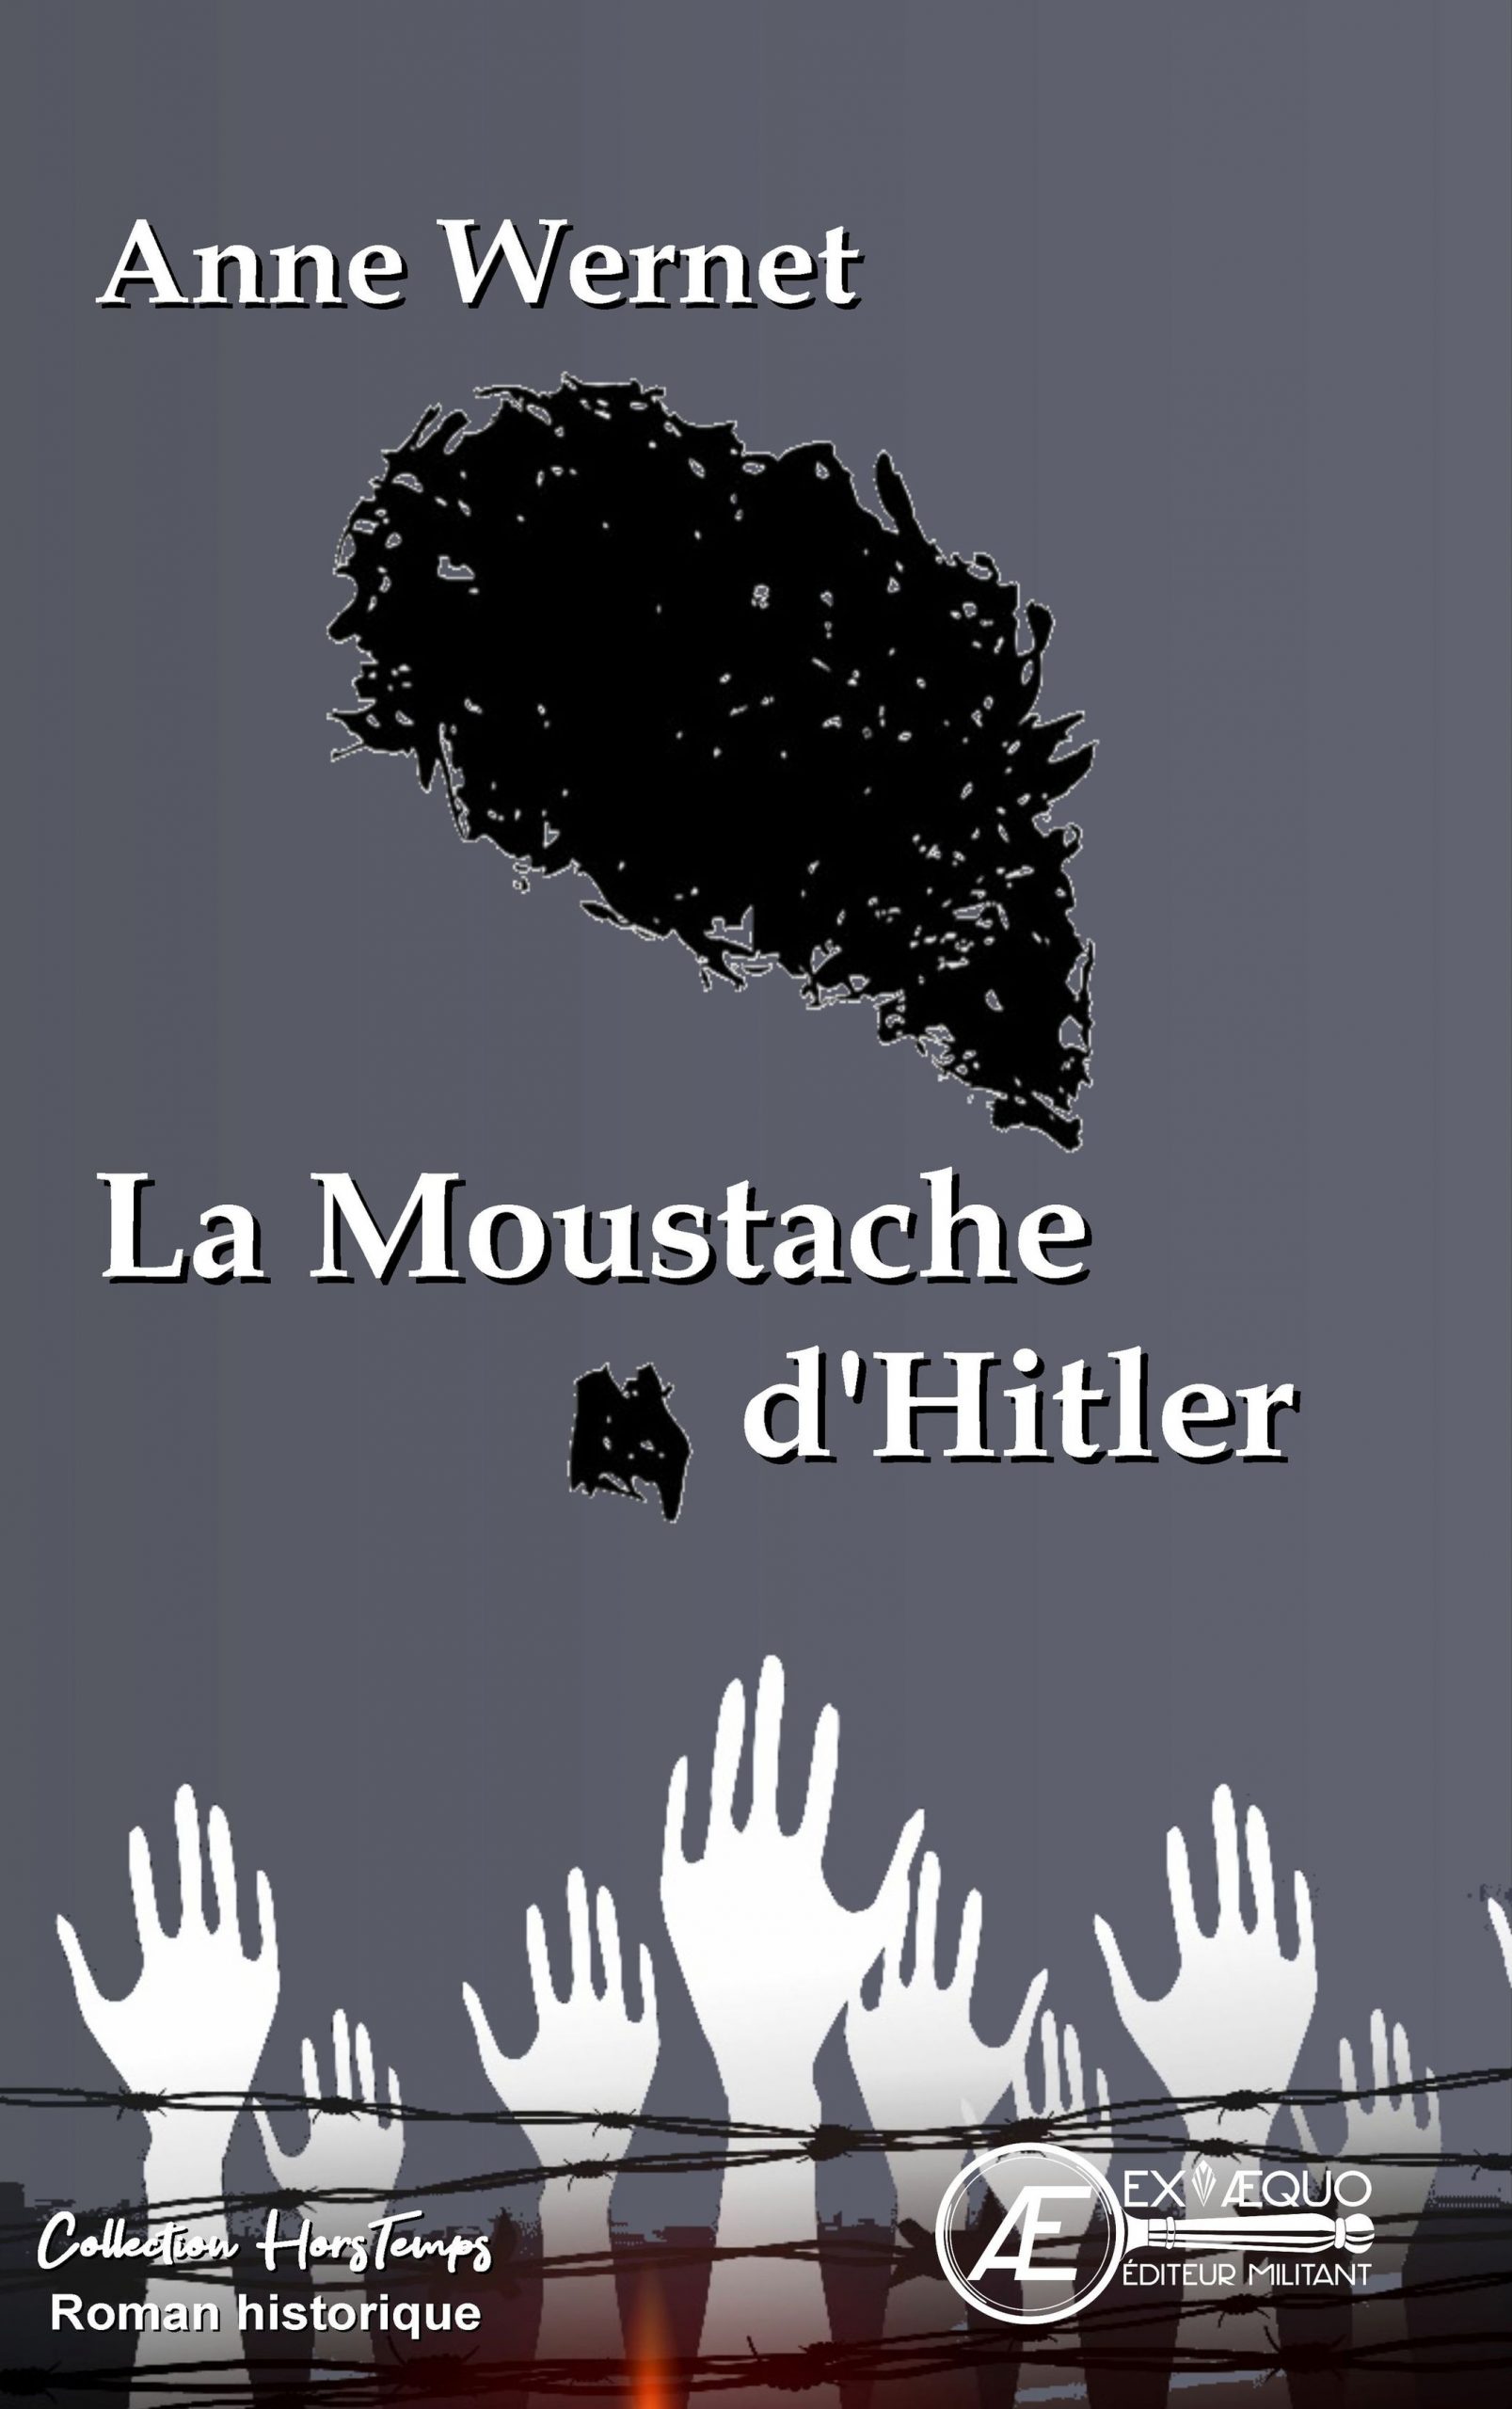 You are currently viewing La moustache d’Hitler, d’Anne Wernet